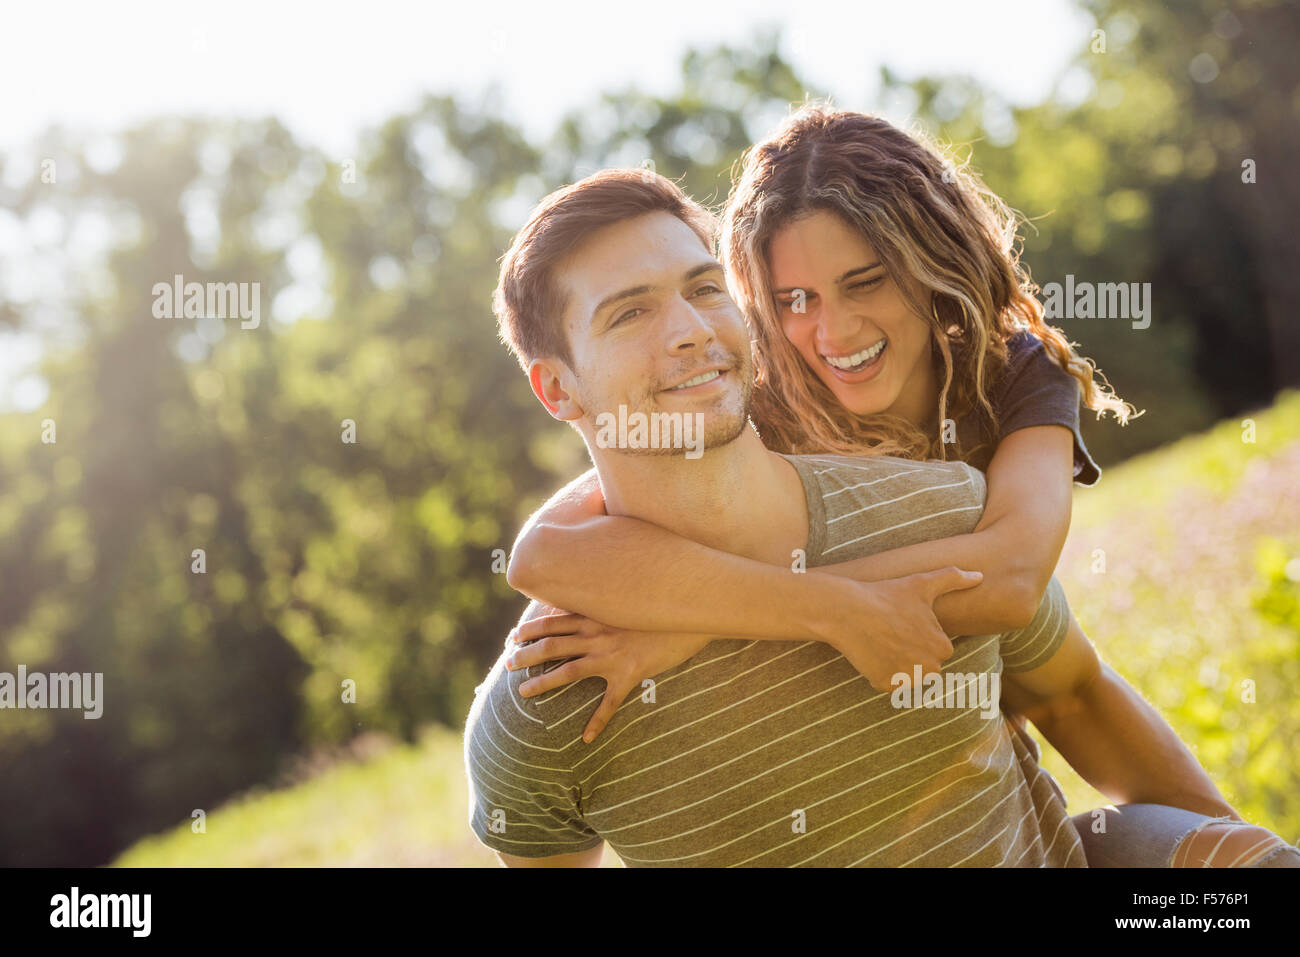 A couple, a man giving a young woman a piggyback, walking through a flower meadow in summer. Stock Photo